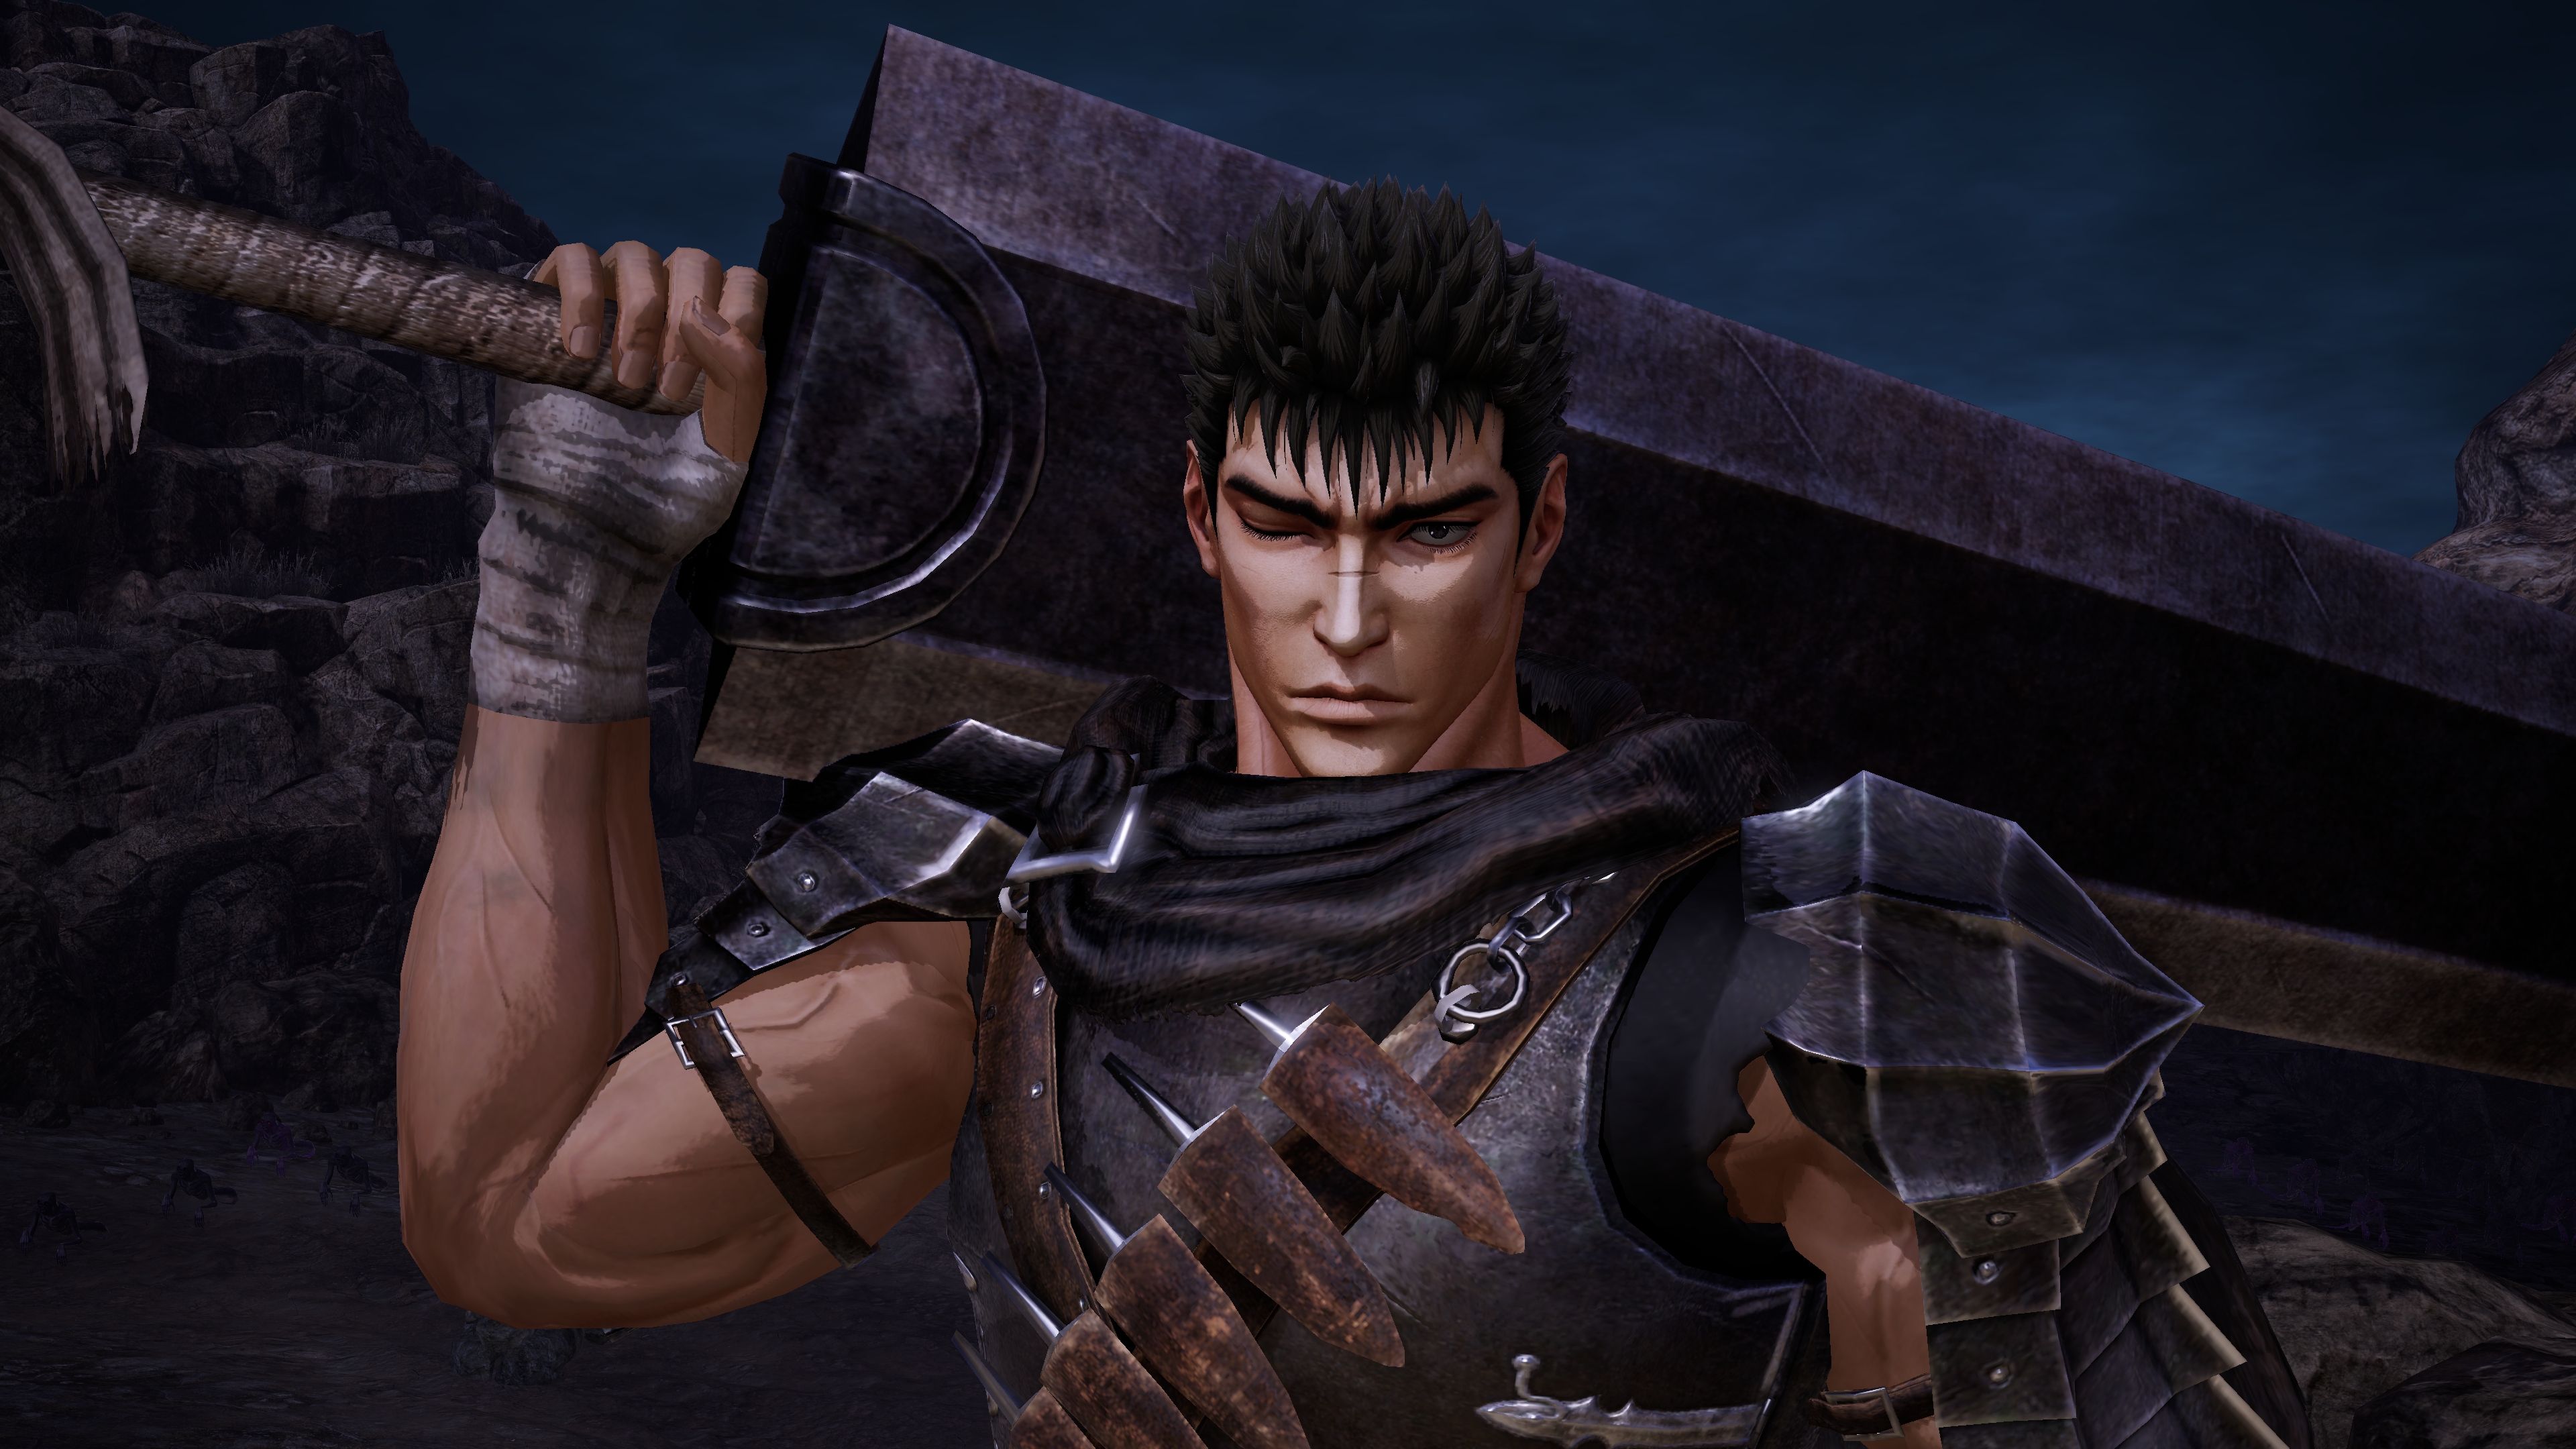 Video Game BERSERK and the Band of the Hawk 4k Ultra HD Wallpaper by user619